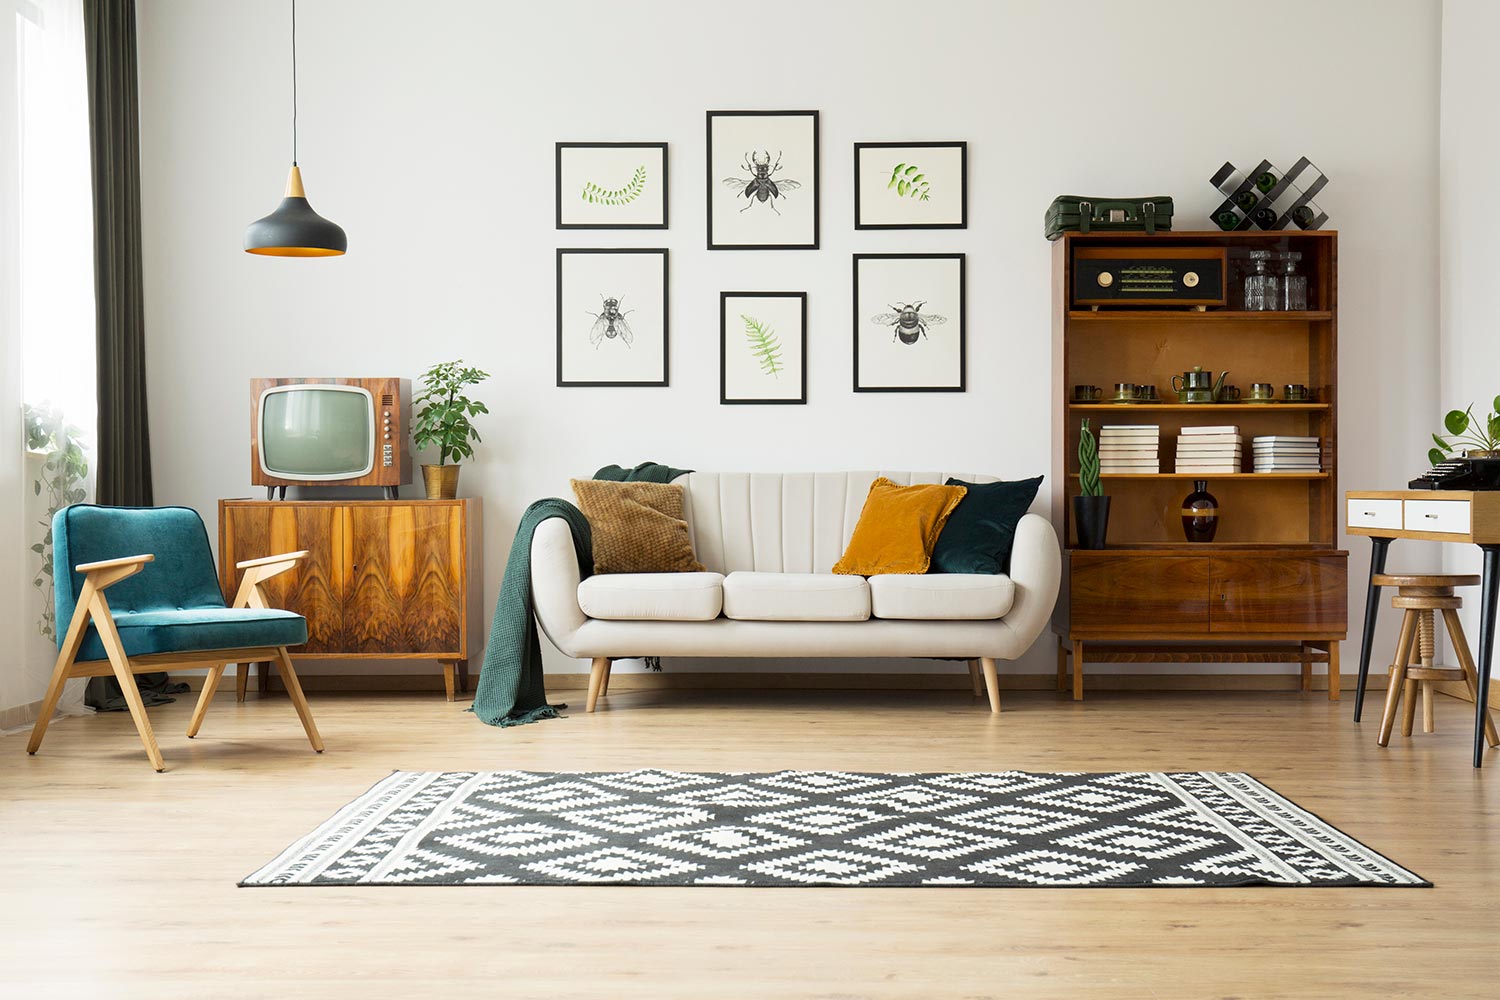 Vintage tv standing on a wooden cabinet next to a comfy couch in a stylish day room